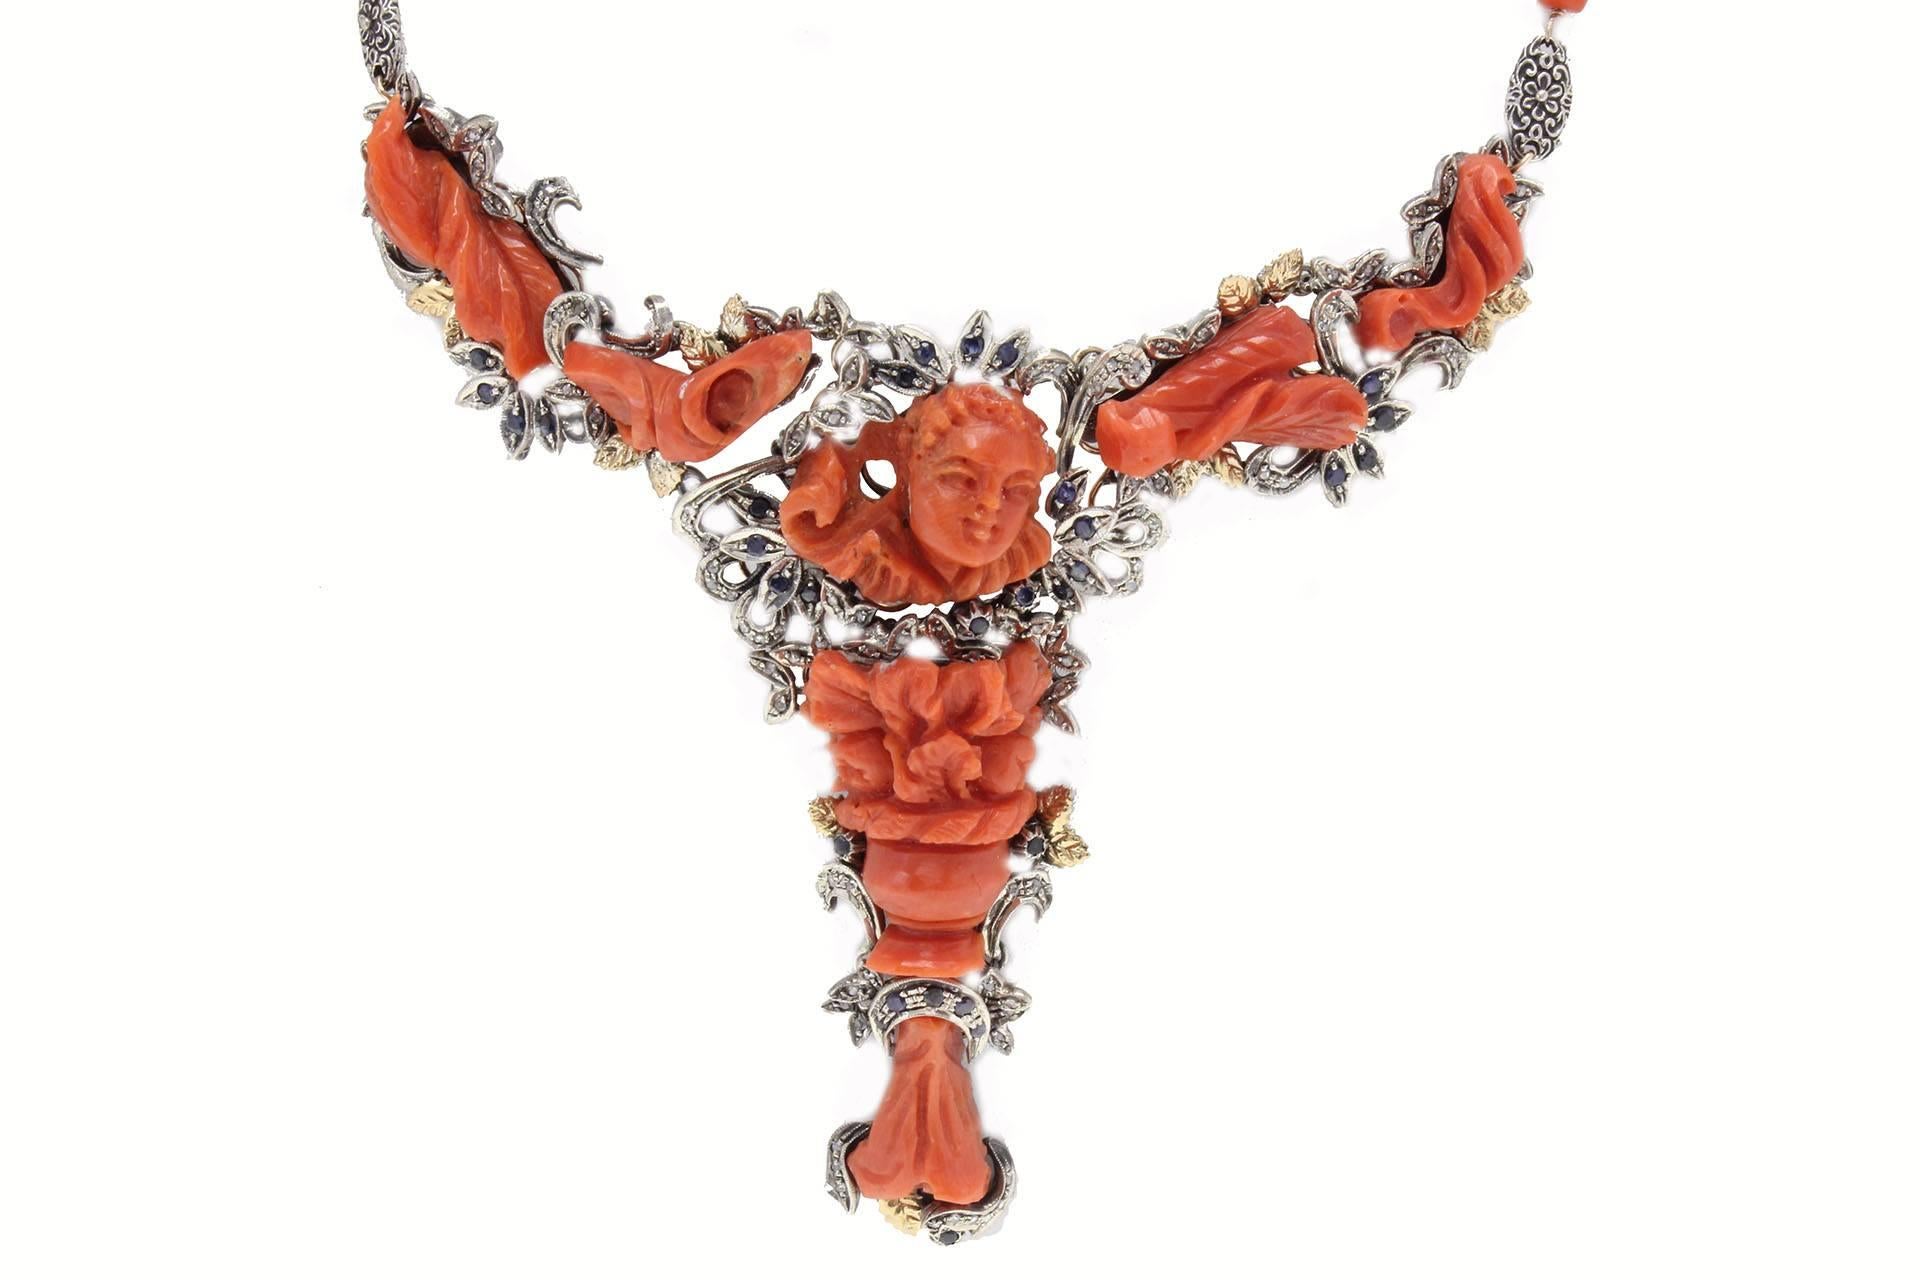 Completely handmade necklace in 9 kt gold and silver with carved coral, diamonds and blue sapphires.

coral (23.20 gr), 
diamonds (0.87 kt) 
blue sapphires (2.02 kt)
tot.weight 70.80
r.f  ocfu